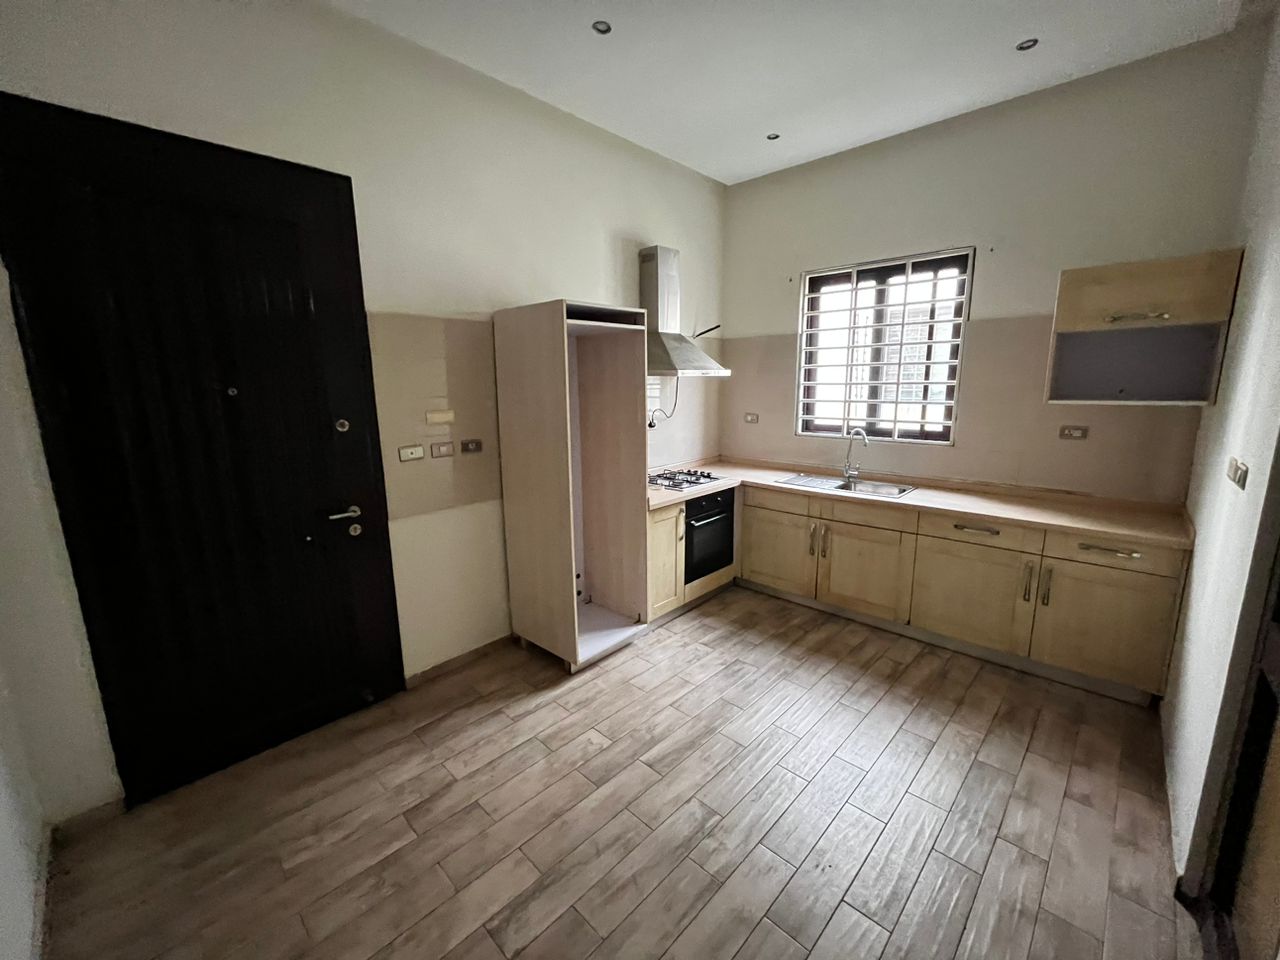 Executive 3-Bedroom Self Compound House with Boys Quarters for Rent at East Legon Adjiringanor